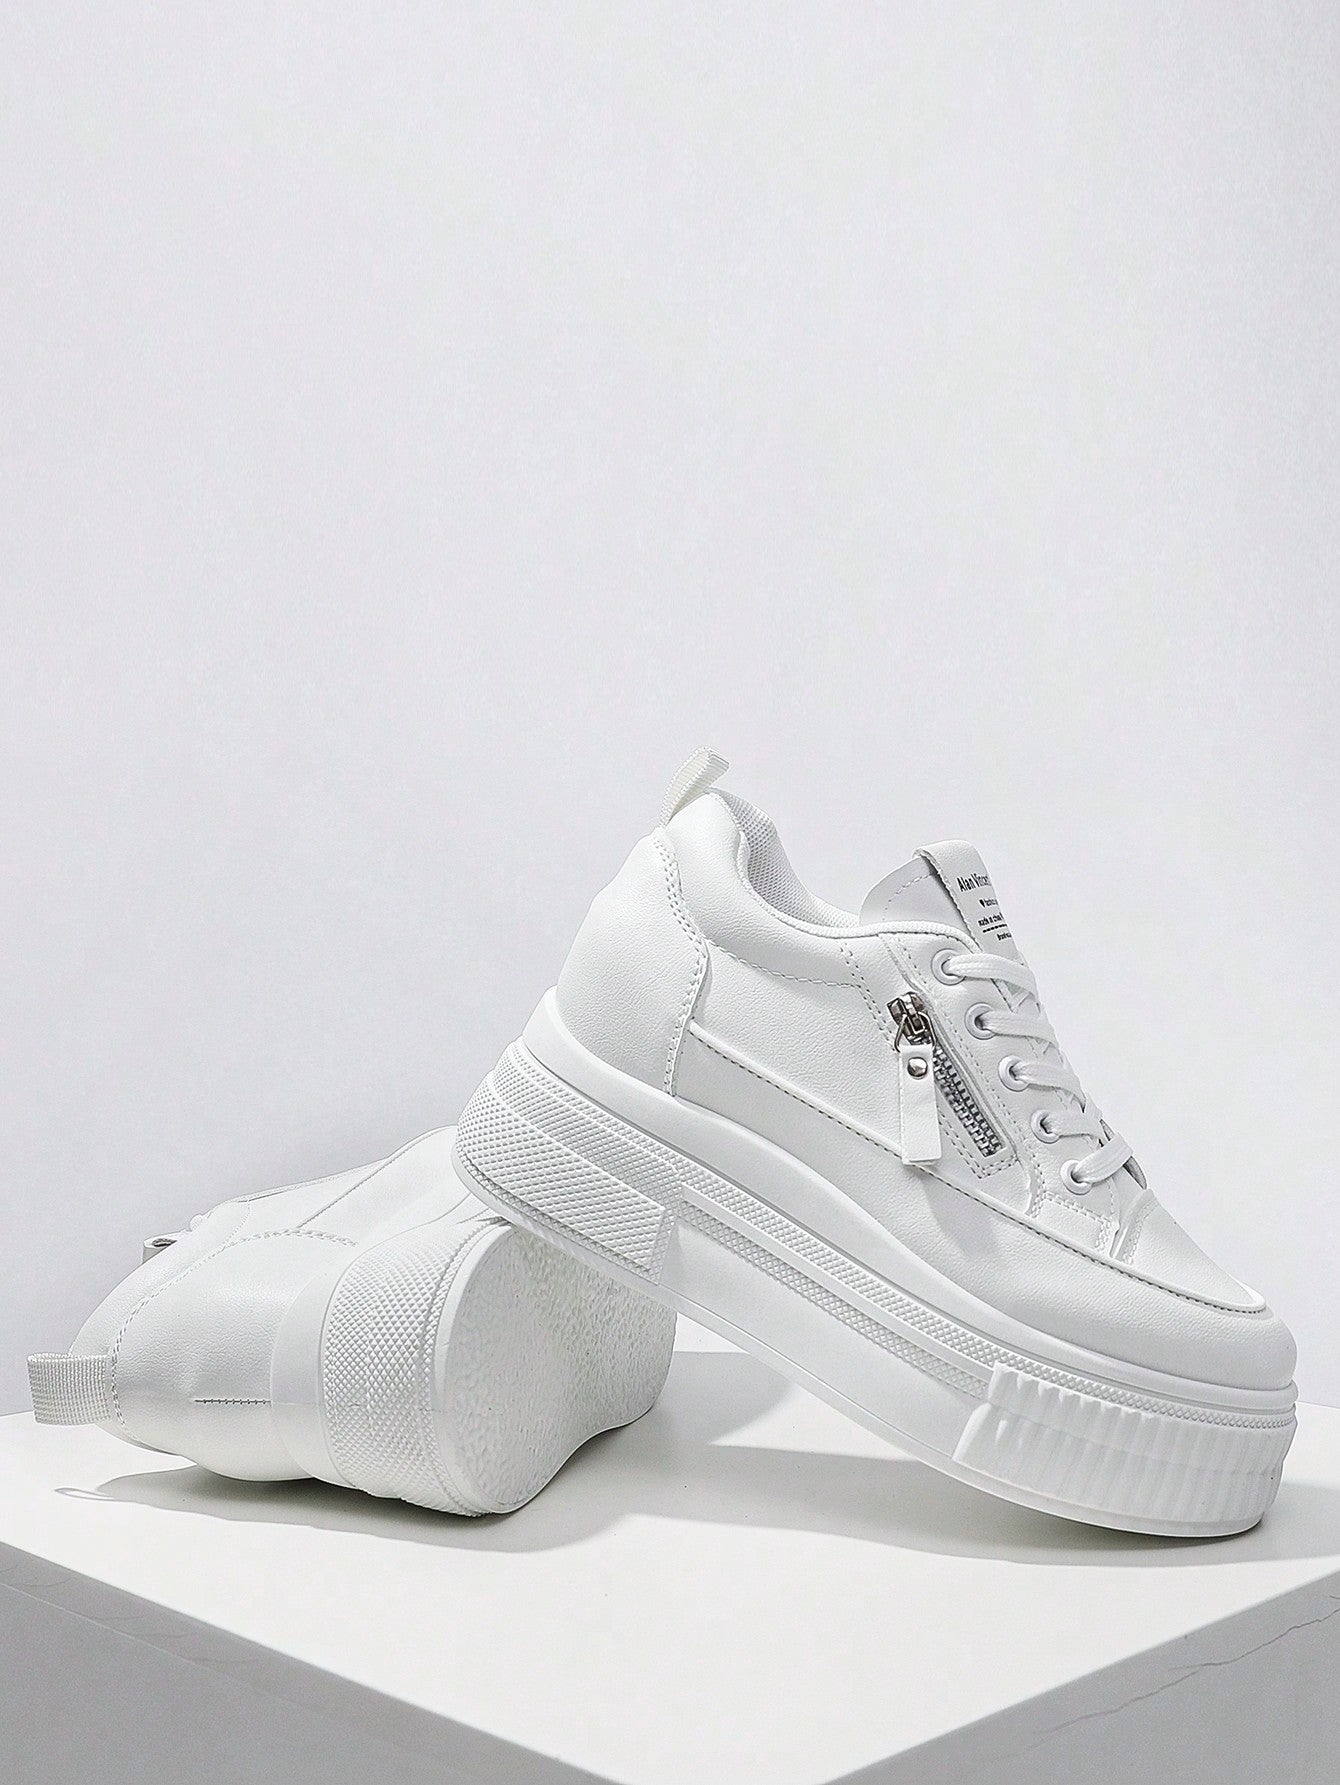 New Style Casual Shoes For Women, Ladies Platform Shoes With  Zipper, White Shoes, Outdoor Comfortable Sneakers, Internal Increase 5cm, Party Shoes, Suitable For Short Women-White-5